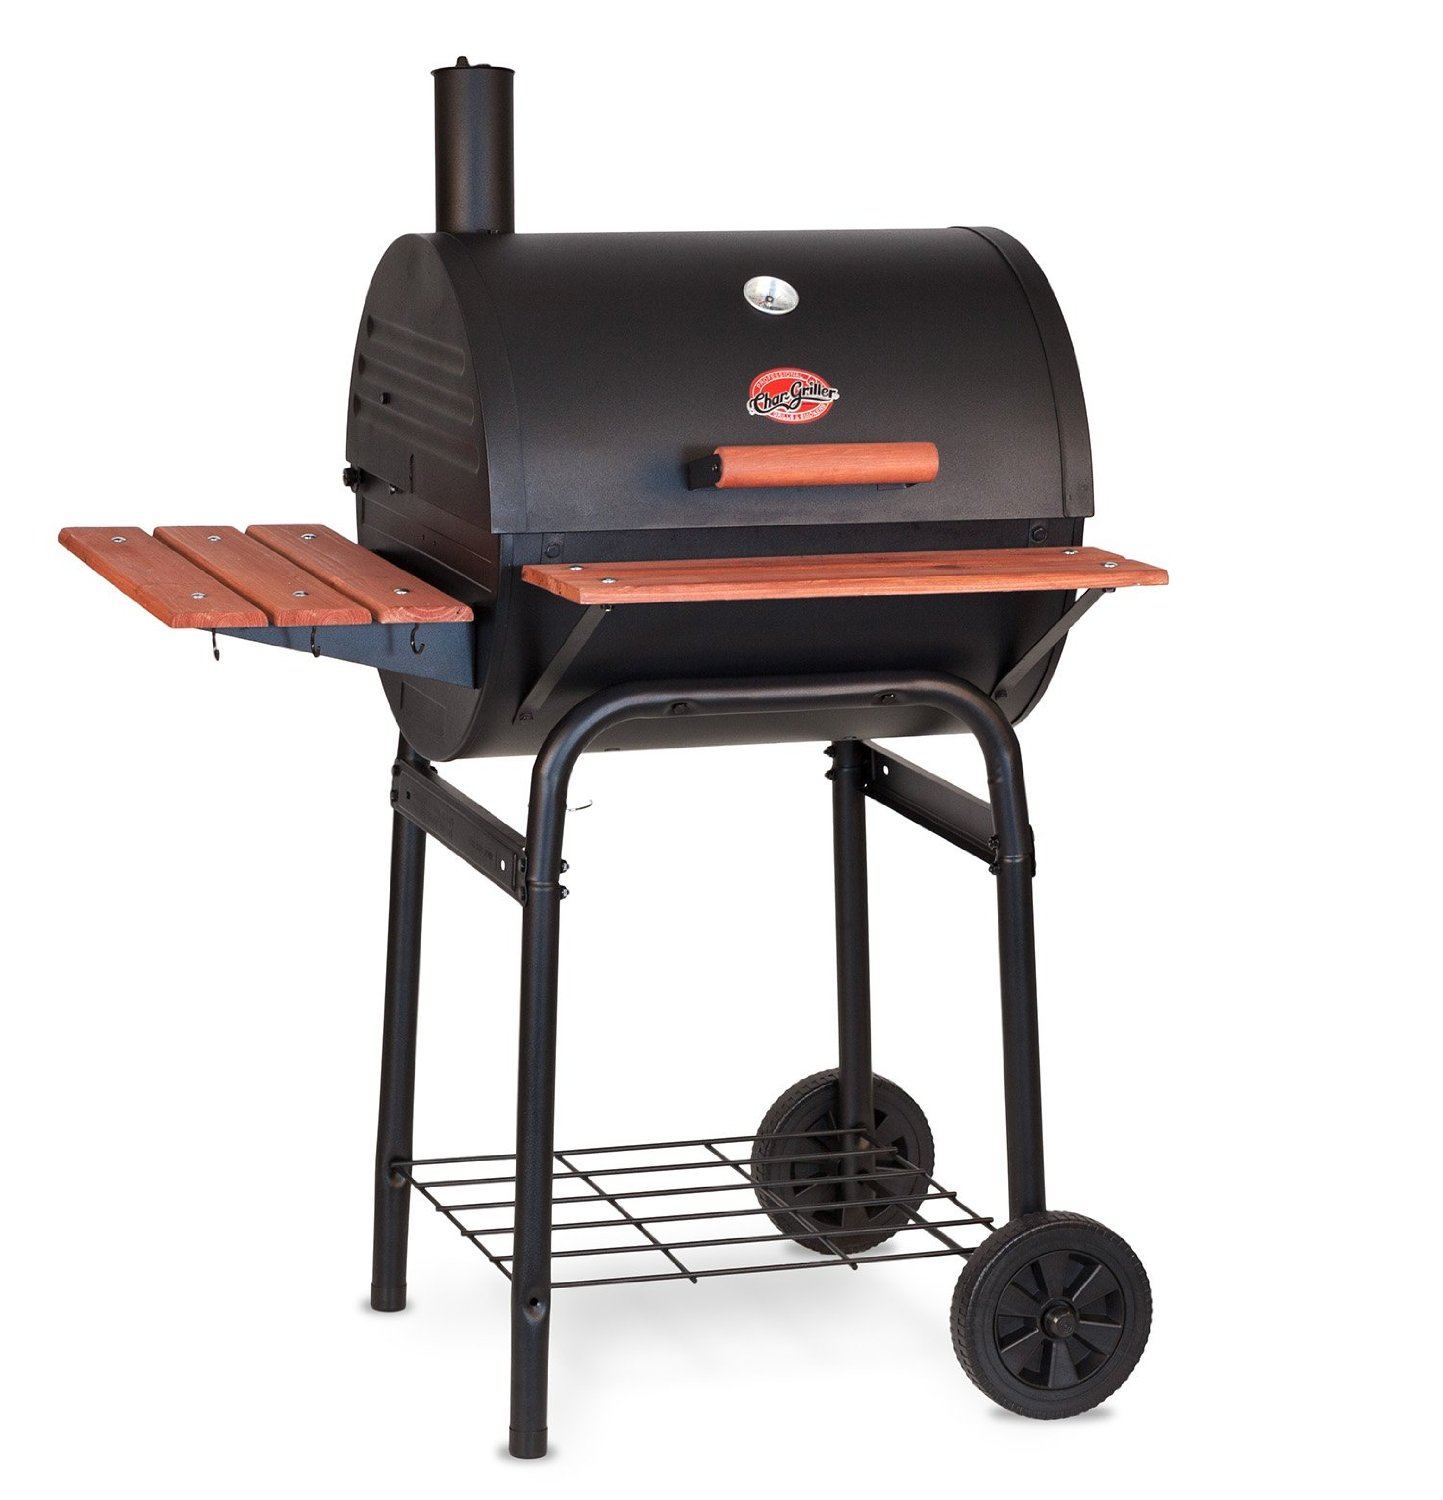 Time To Start Grilling With The Very Best- Top 10 Charcoal Grills